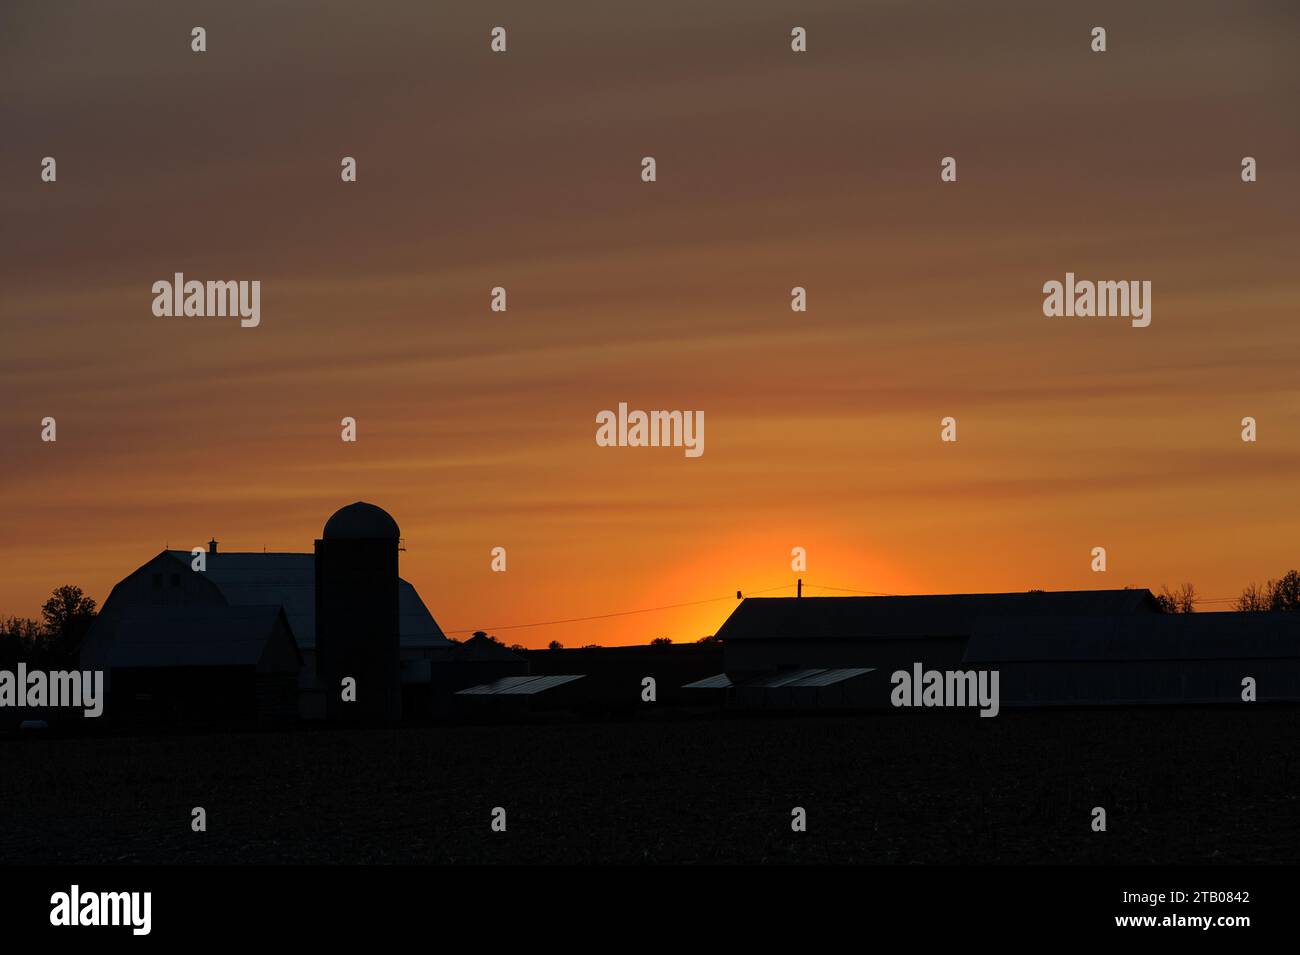 Sunset with farm silhouette Stock Photo